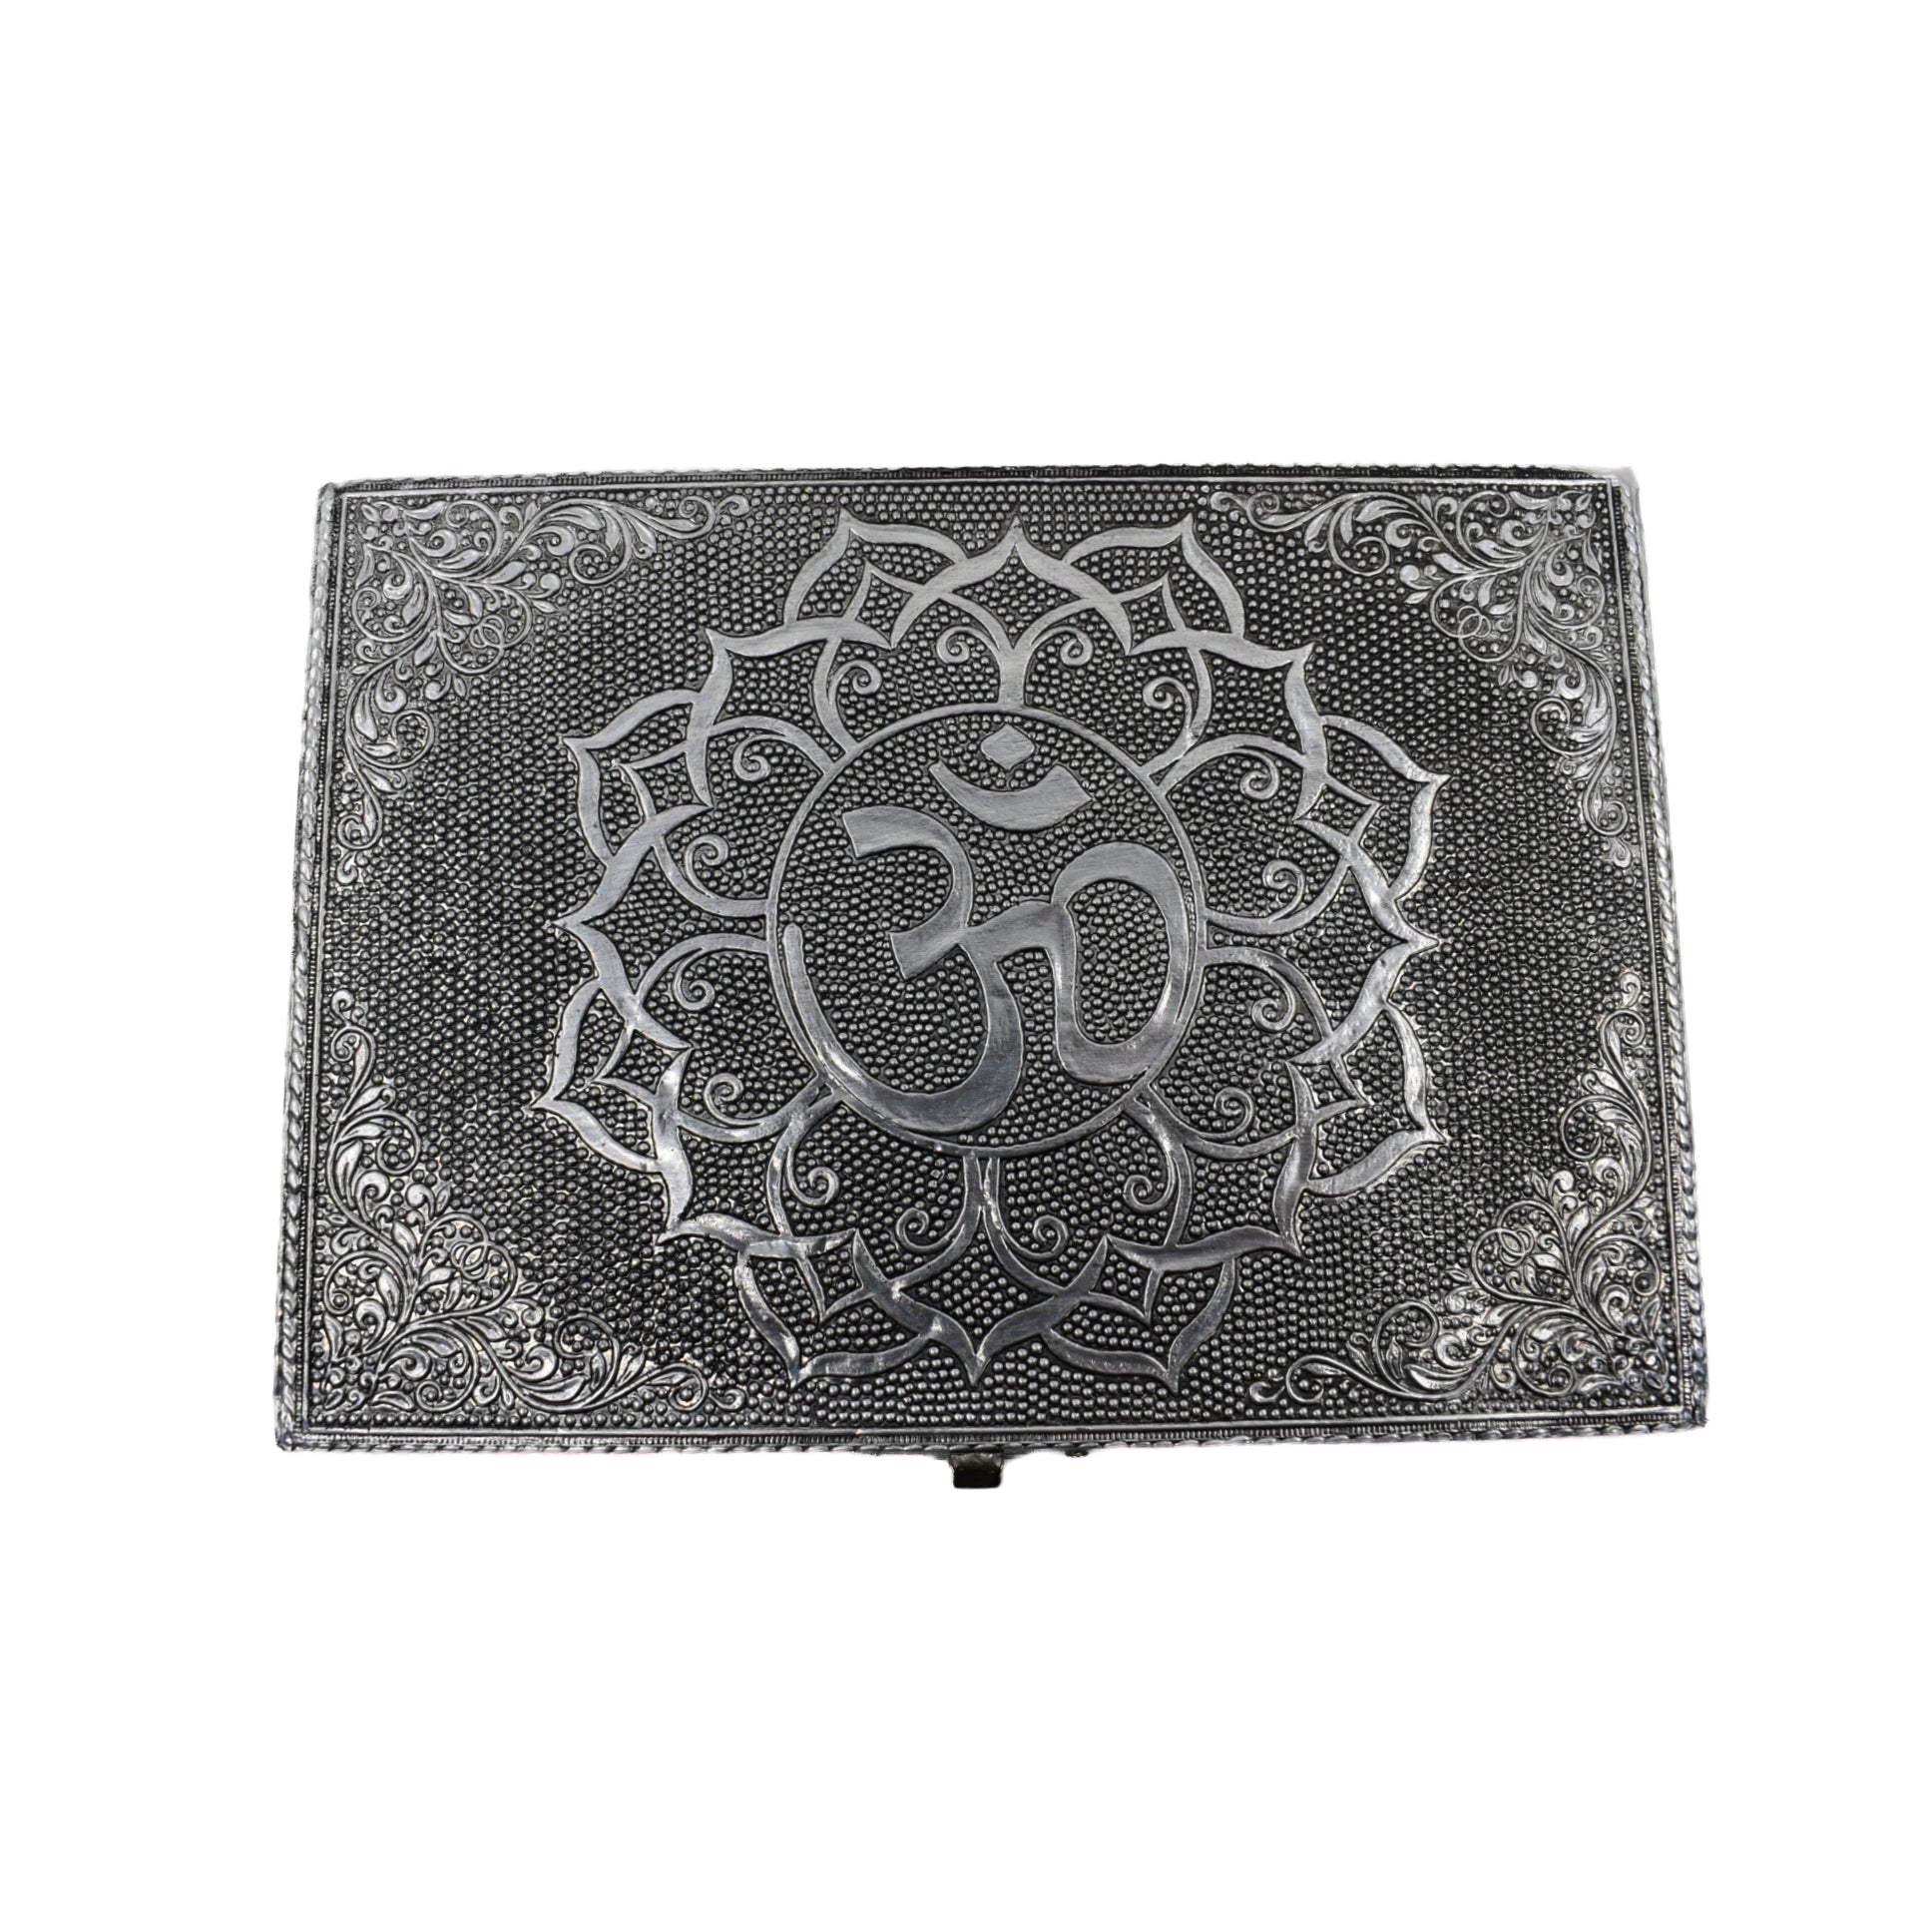 wood box covered in metal that is engraved lotus symbol with om 